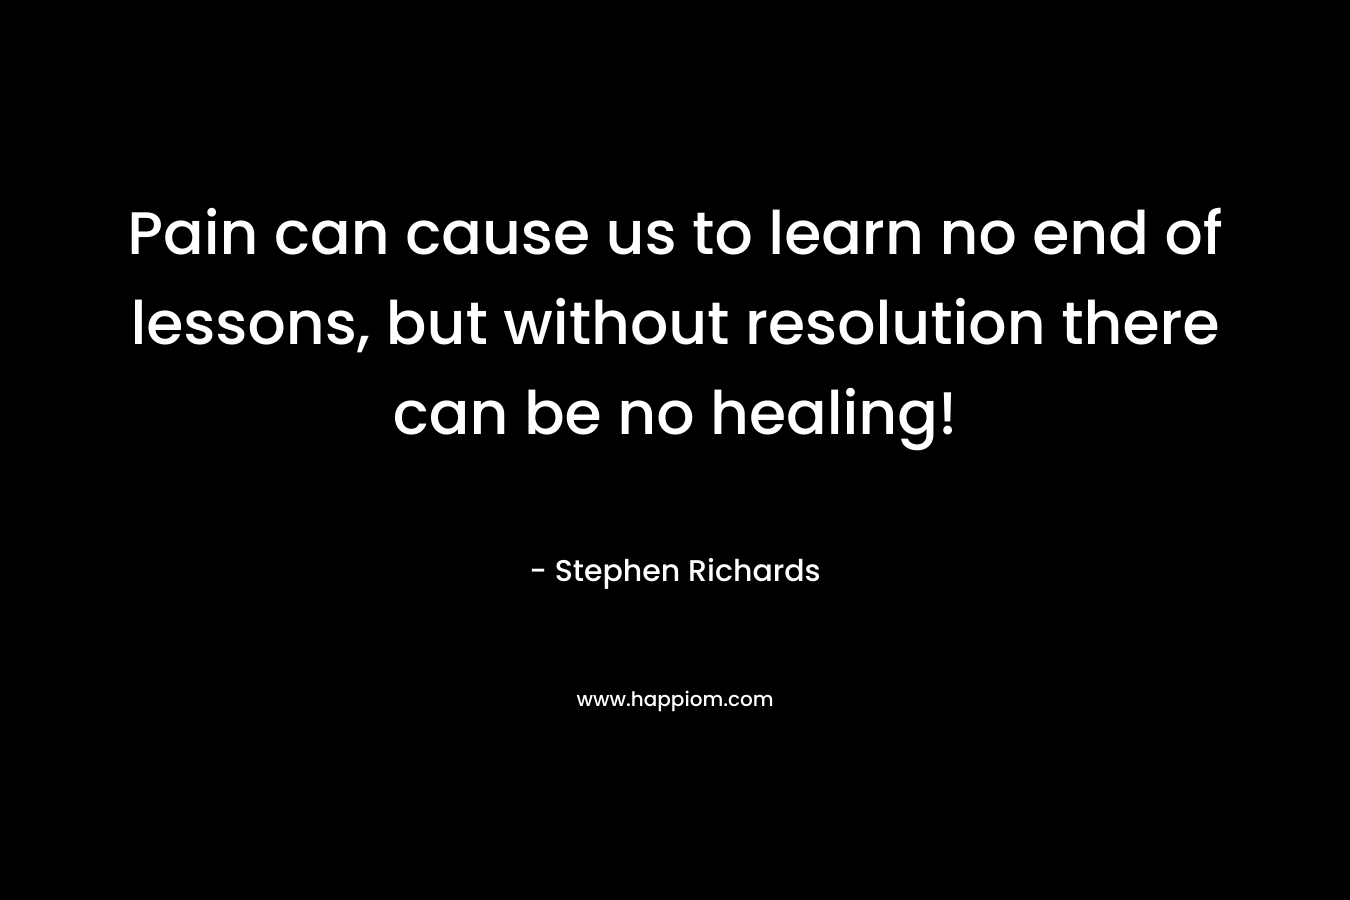 Pain can cause us to learn no end of lessons, but without resolution there can be no healing! – Stephen Richards